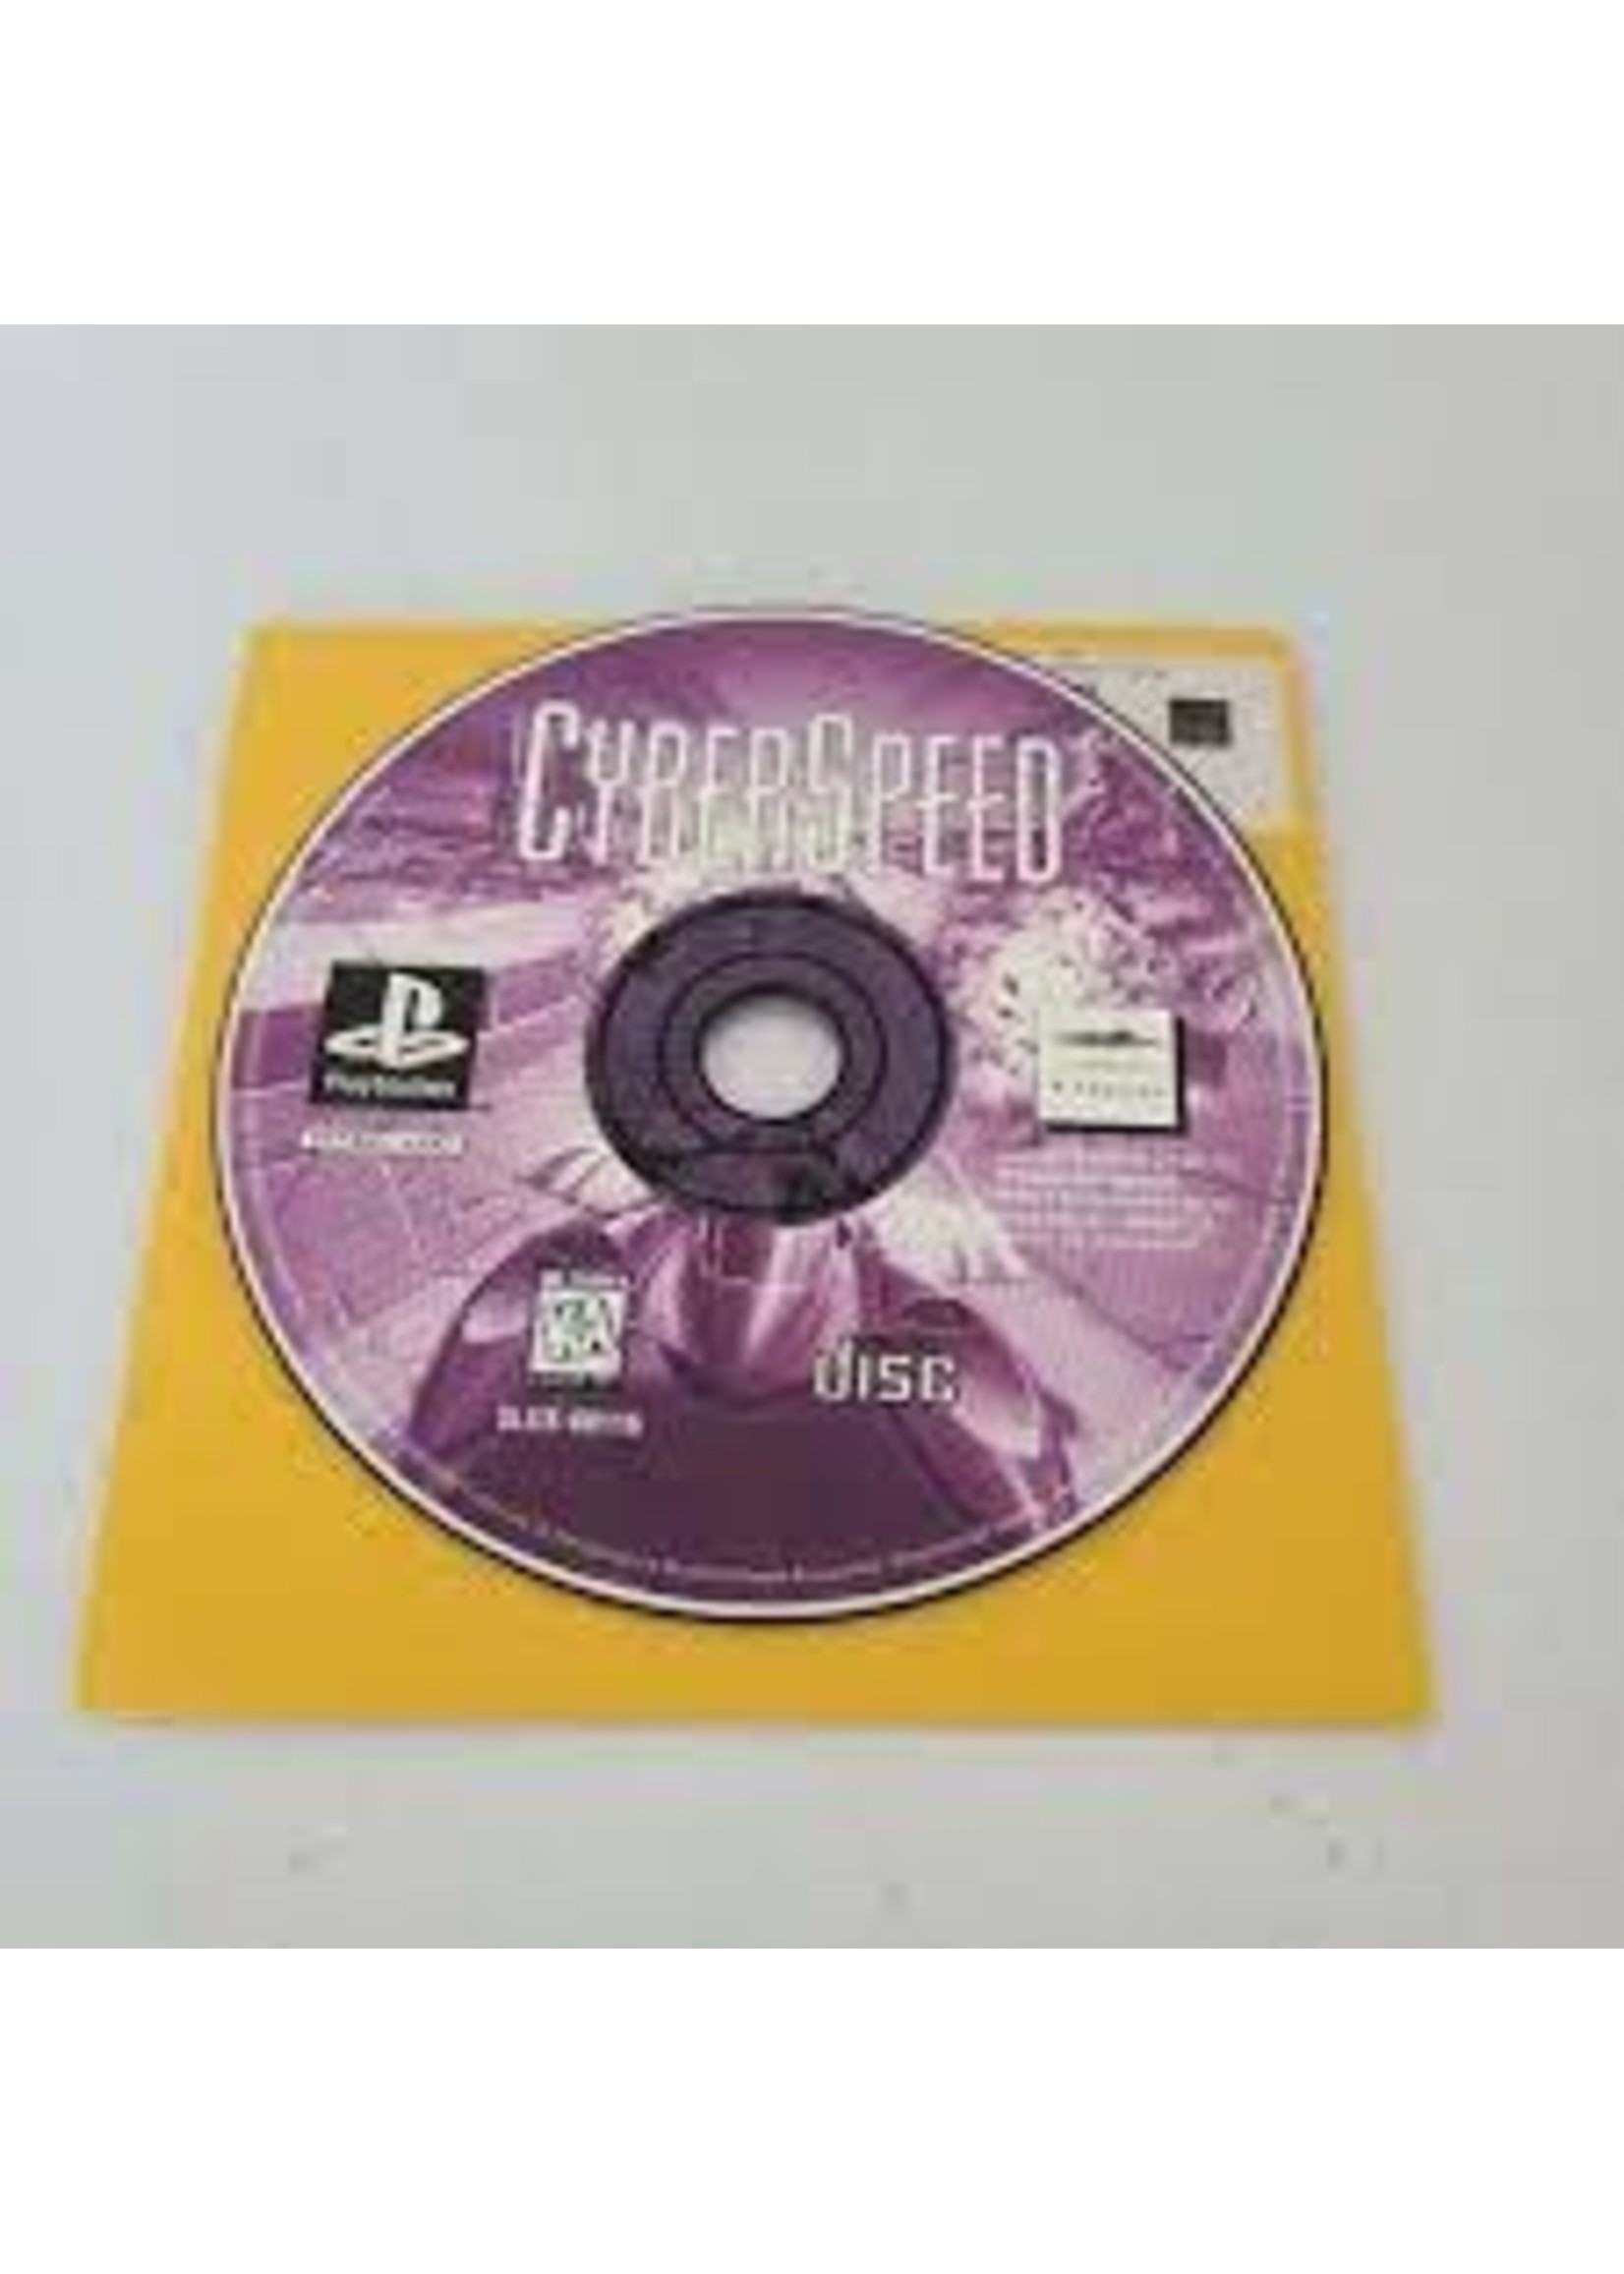 Sony Playstation 1 (PS1) CyberSpeed - Print